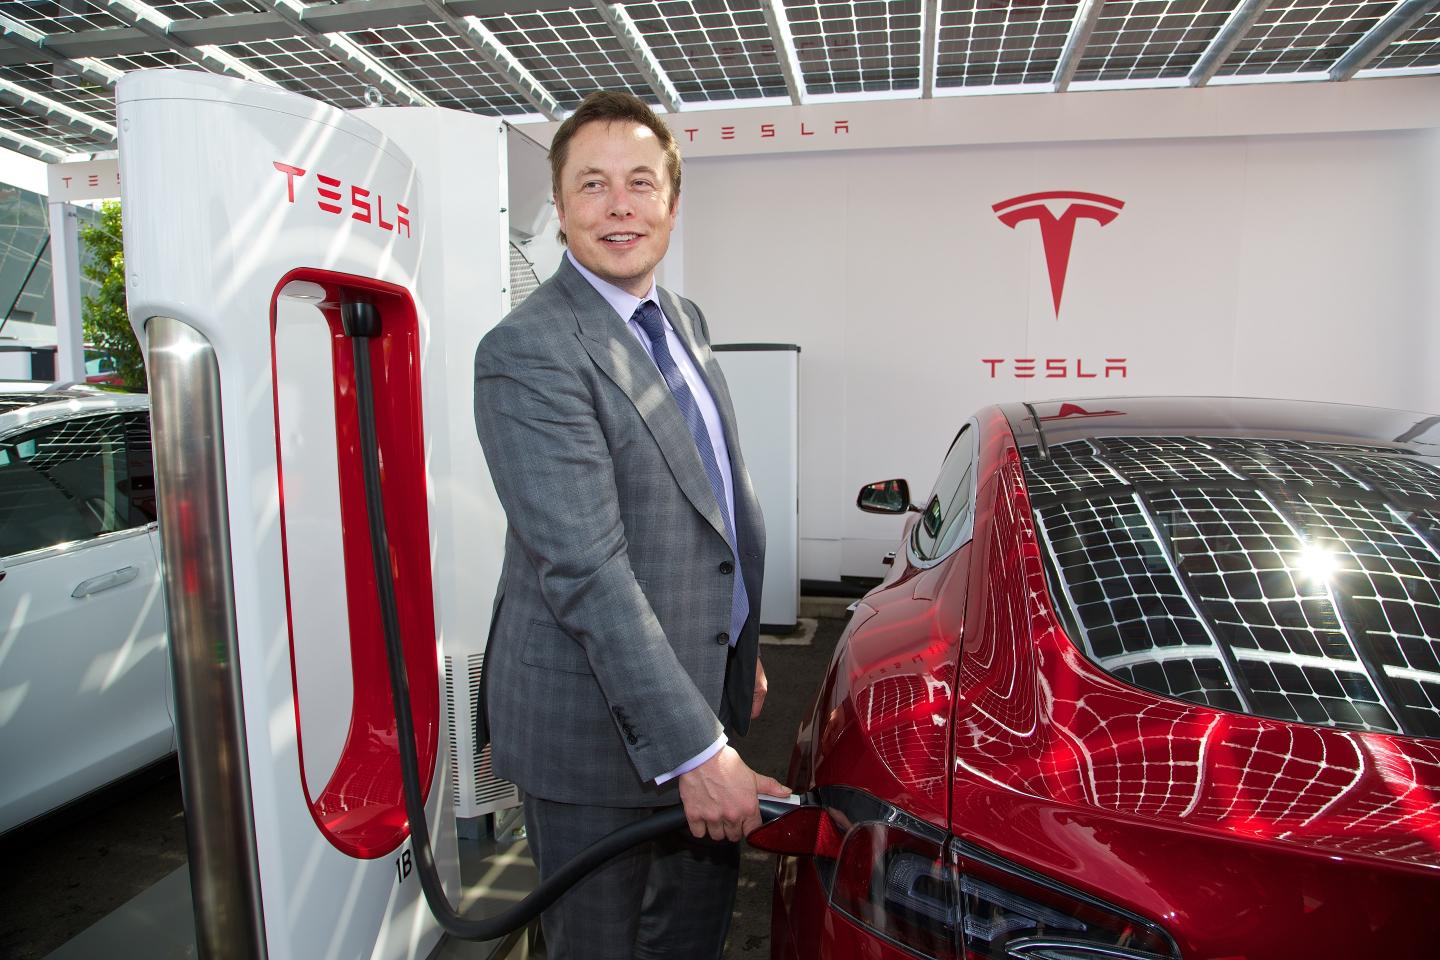 How did Elon Musk make his fortune before investing in Tesla?